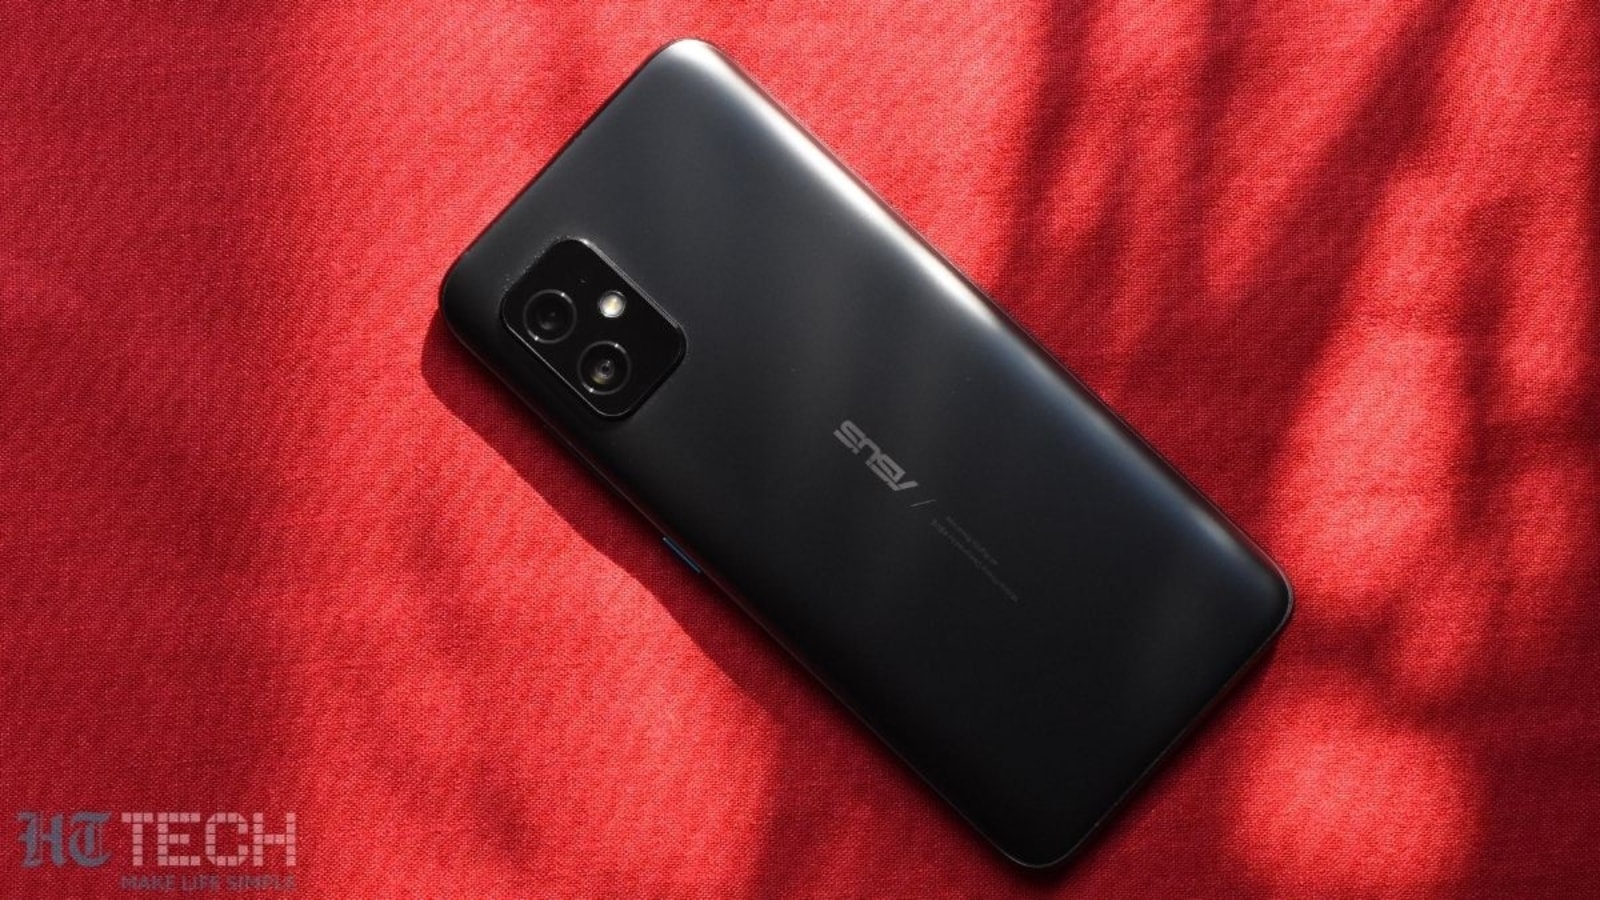 Asus 8z review: A compact phone with a lot of ZING!